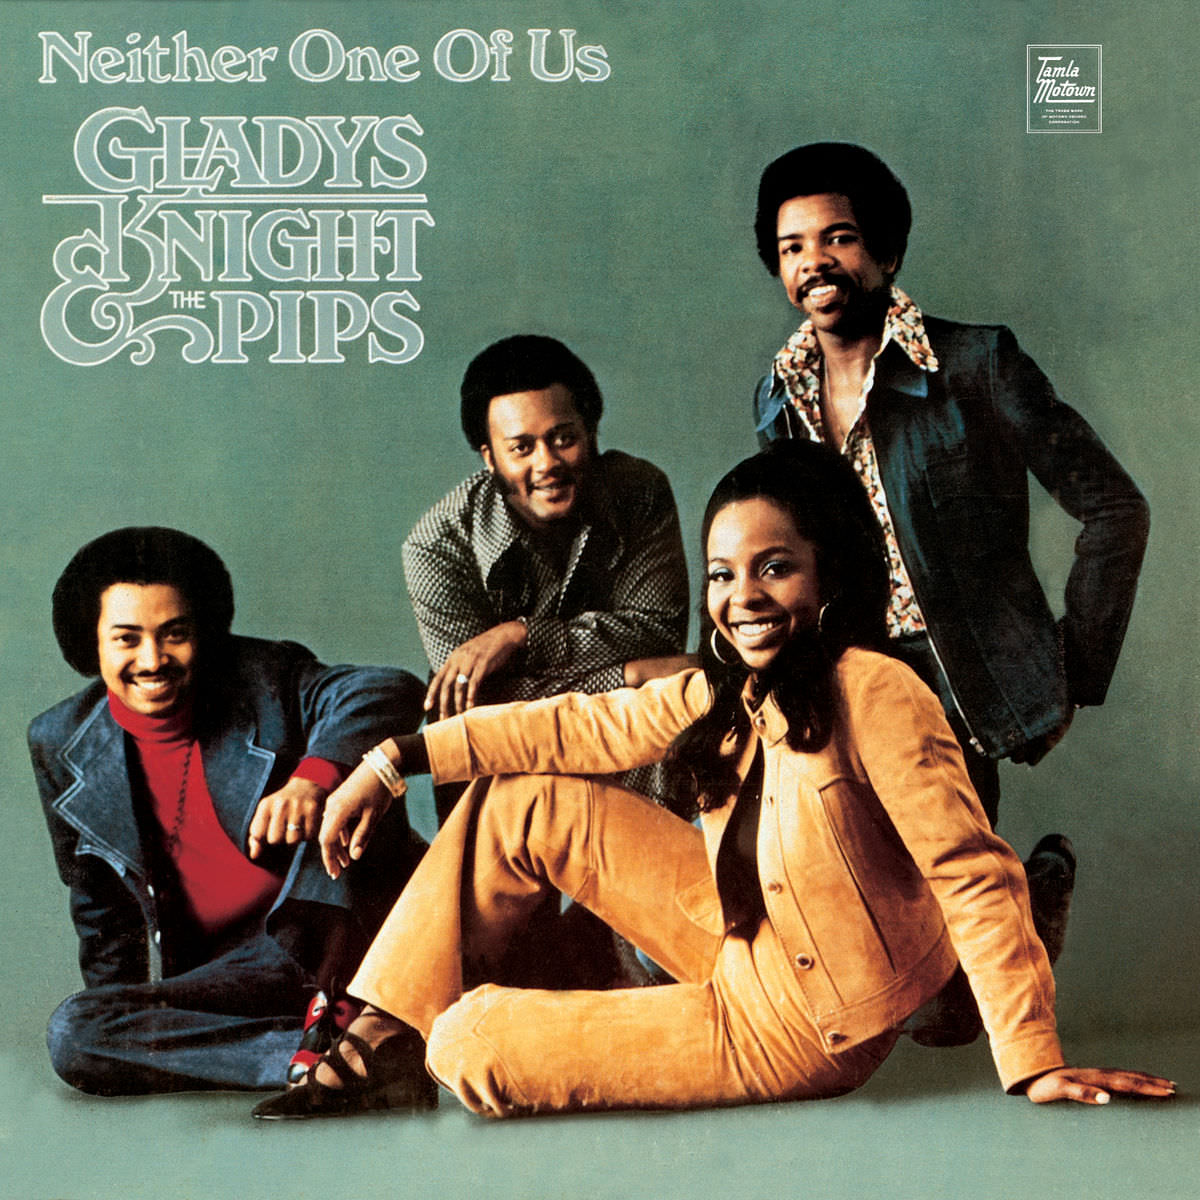 Gladys Knight & The Pips – Neither One Of Us (1973/2014) [FLAC 24bit/192kHz]